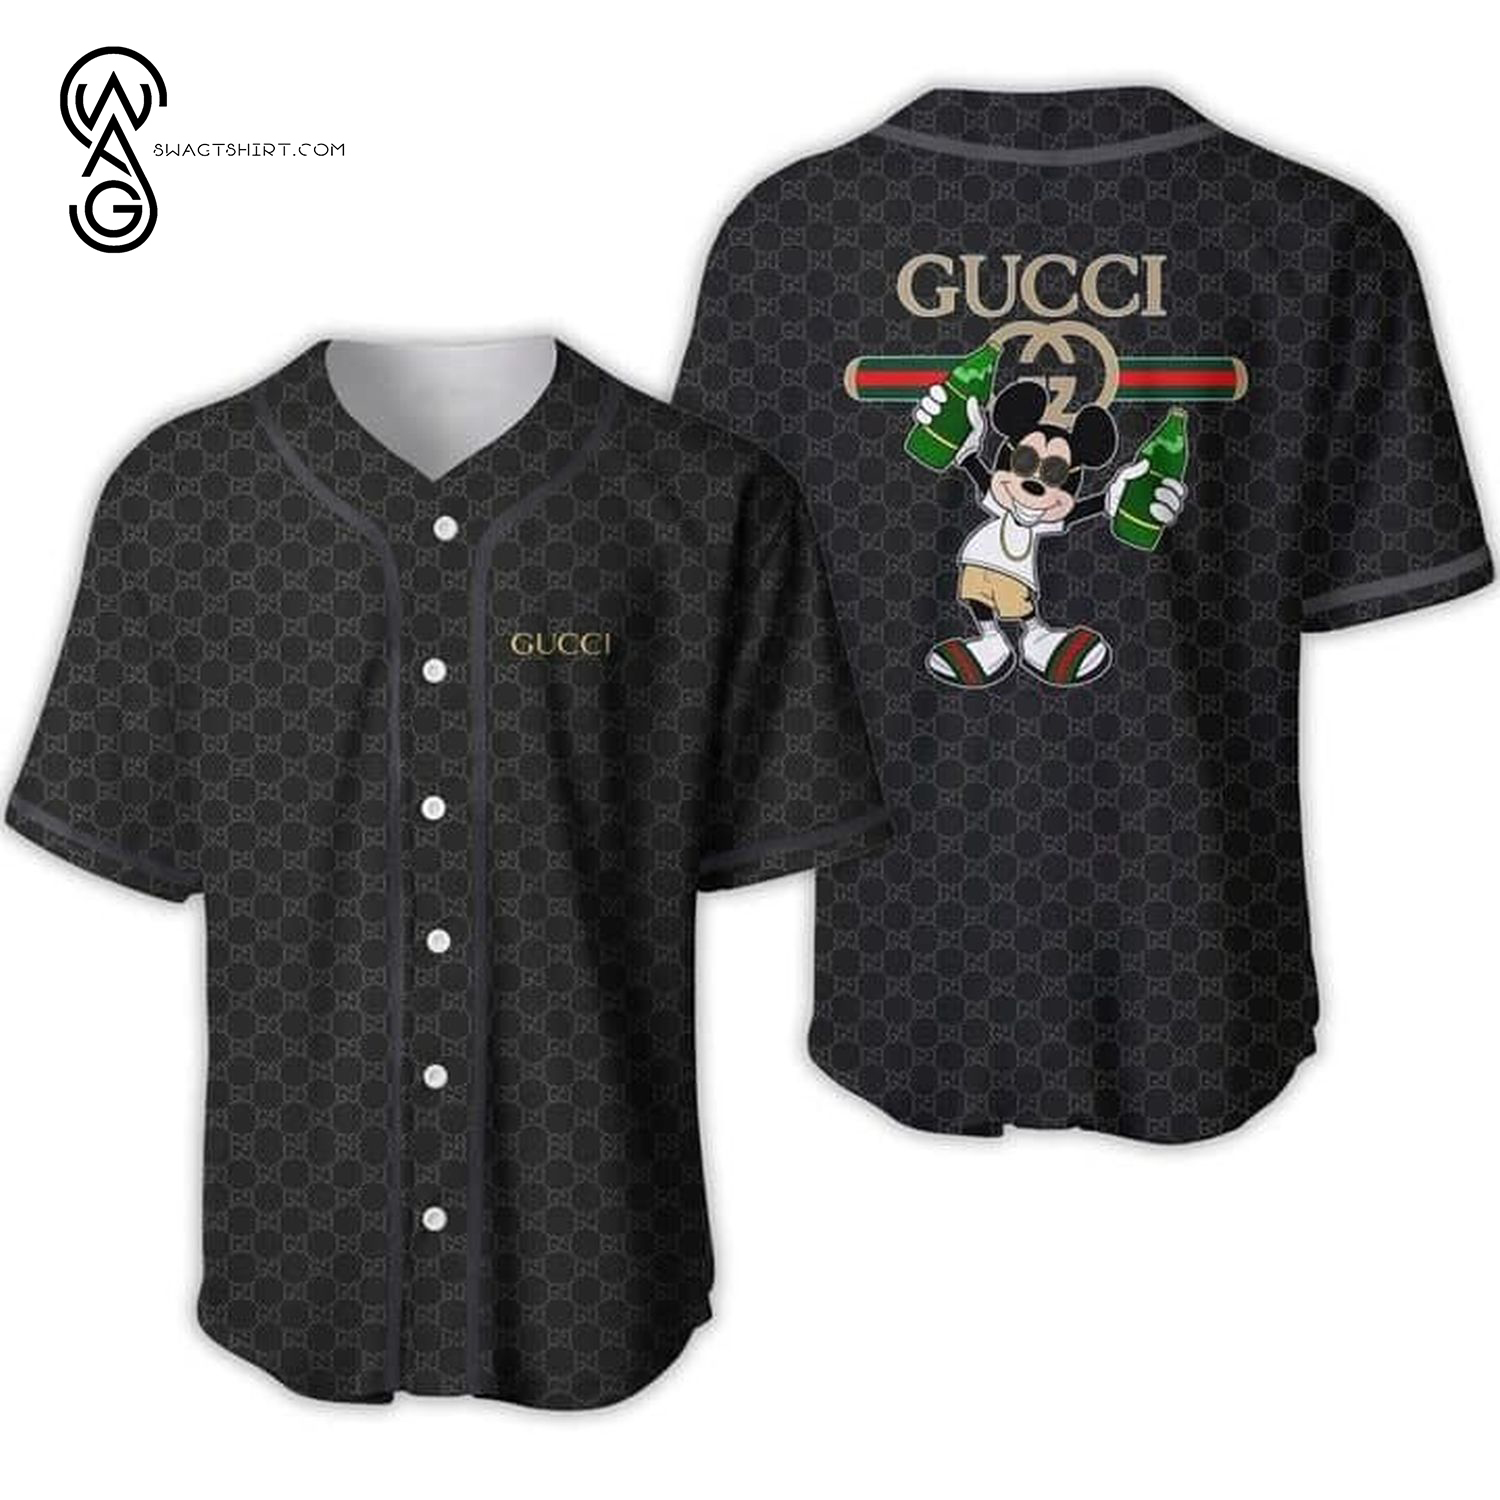 Gucci Mickey Mouse With Glasses Full Printed Baseball Jersey